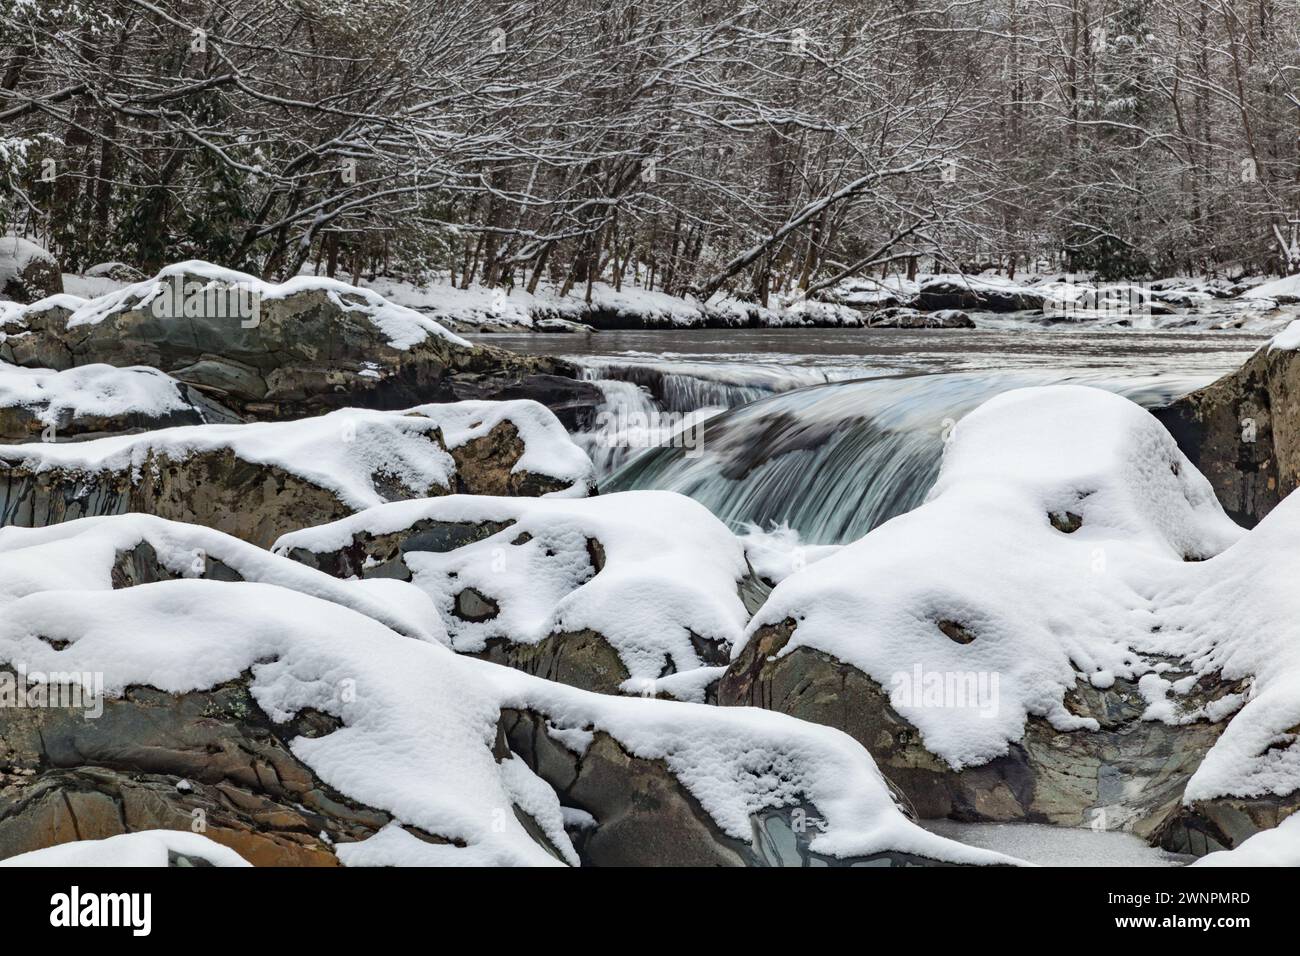 Ice and Snow on Little Pigeon River in Great Smoky Mountains National Park Stock Photo